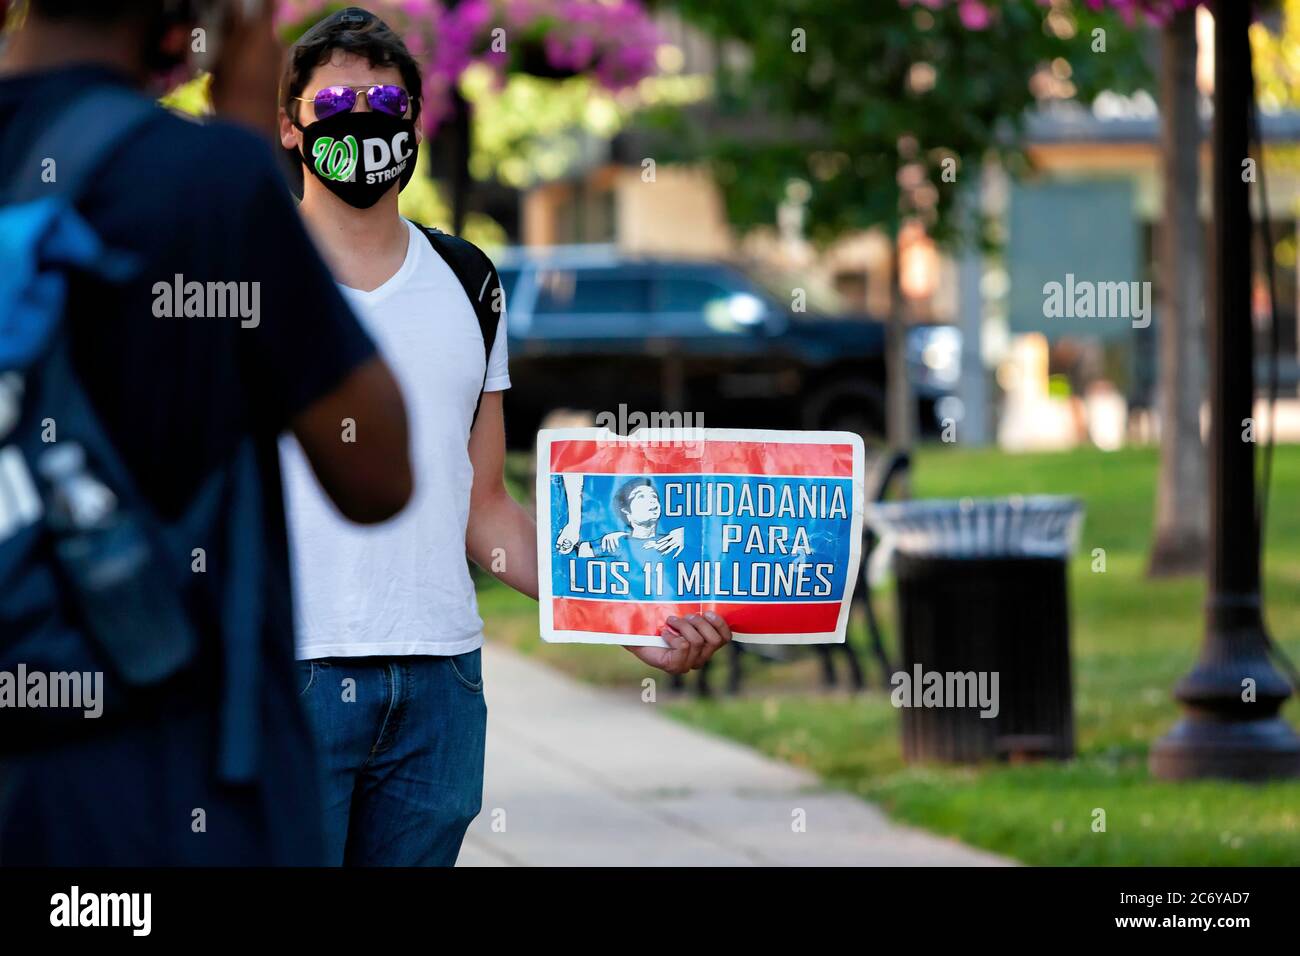 A protester holds a sign supporting citizenship for the 11 million undocumented immigrants in the United States, Washington, DC, United States Stock Photo